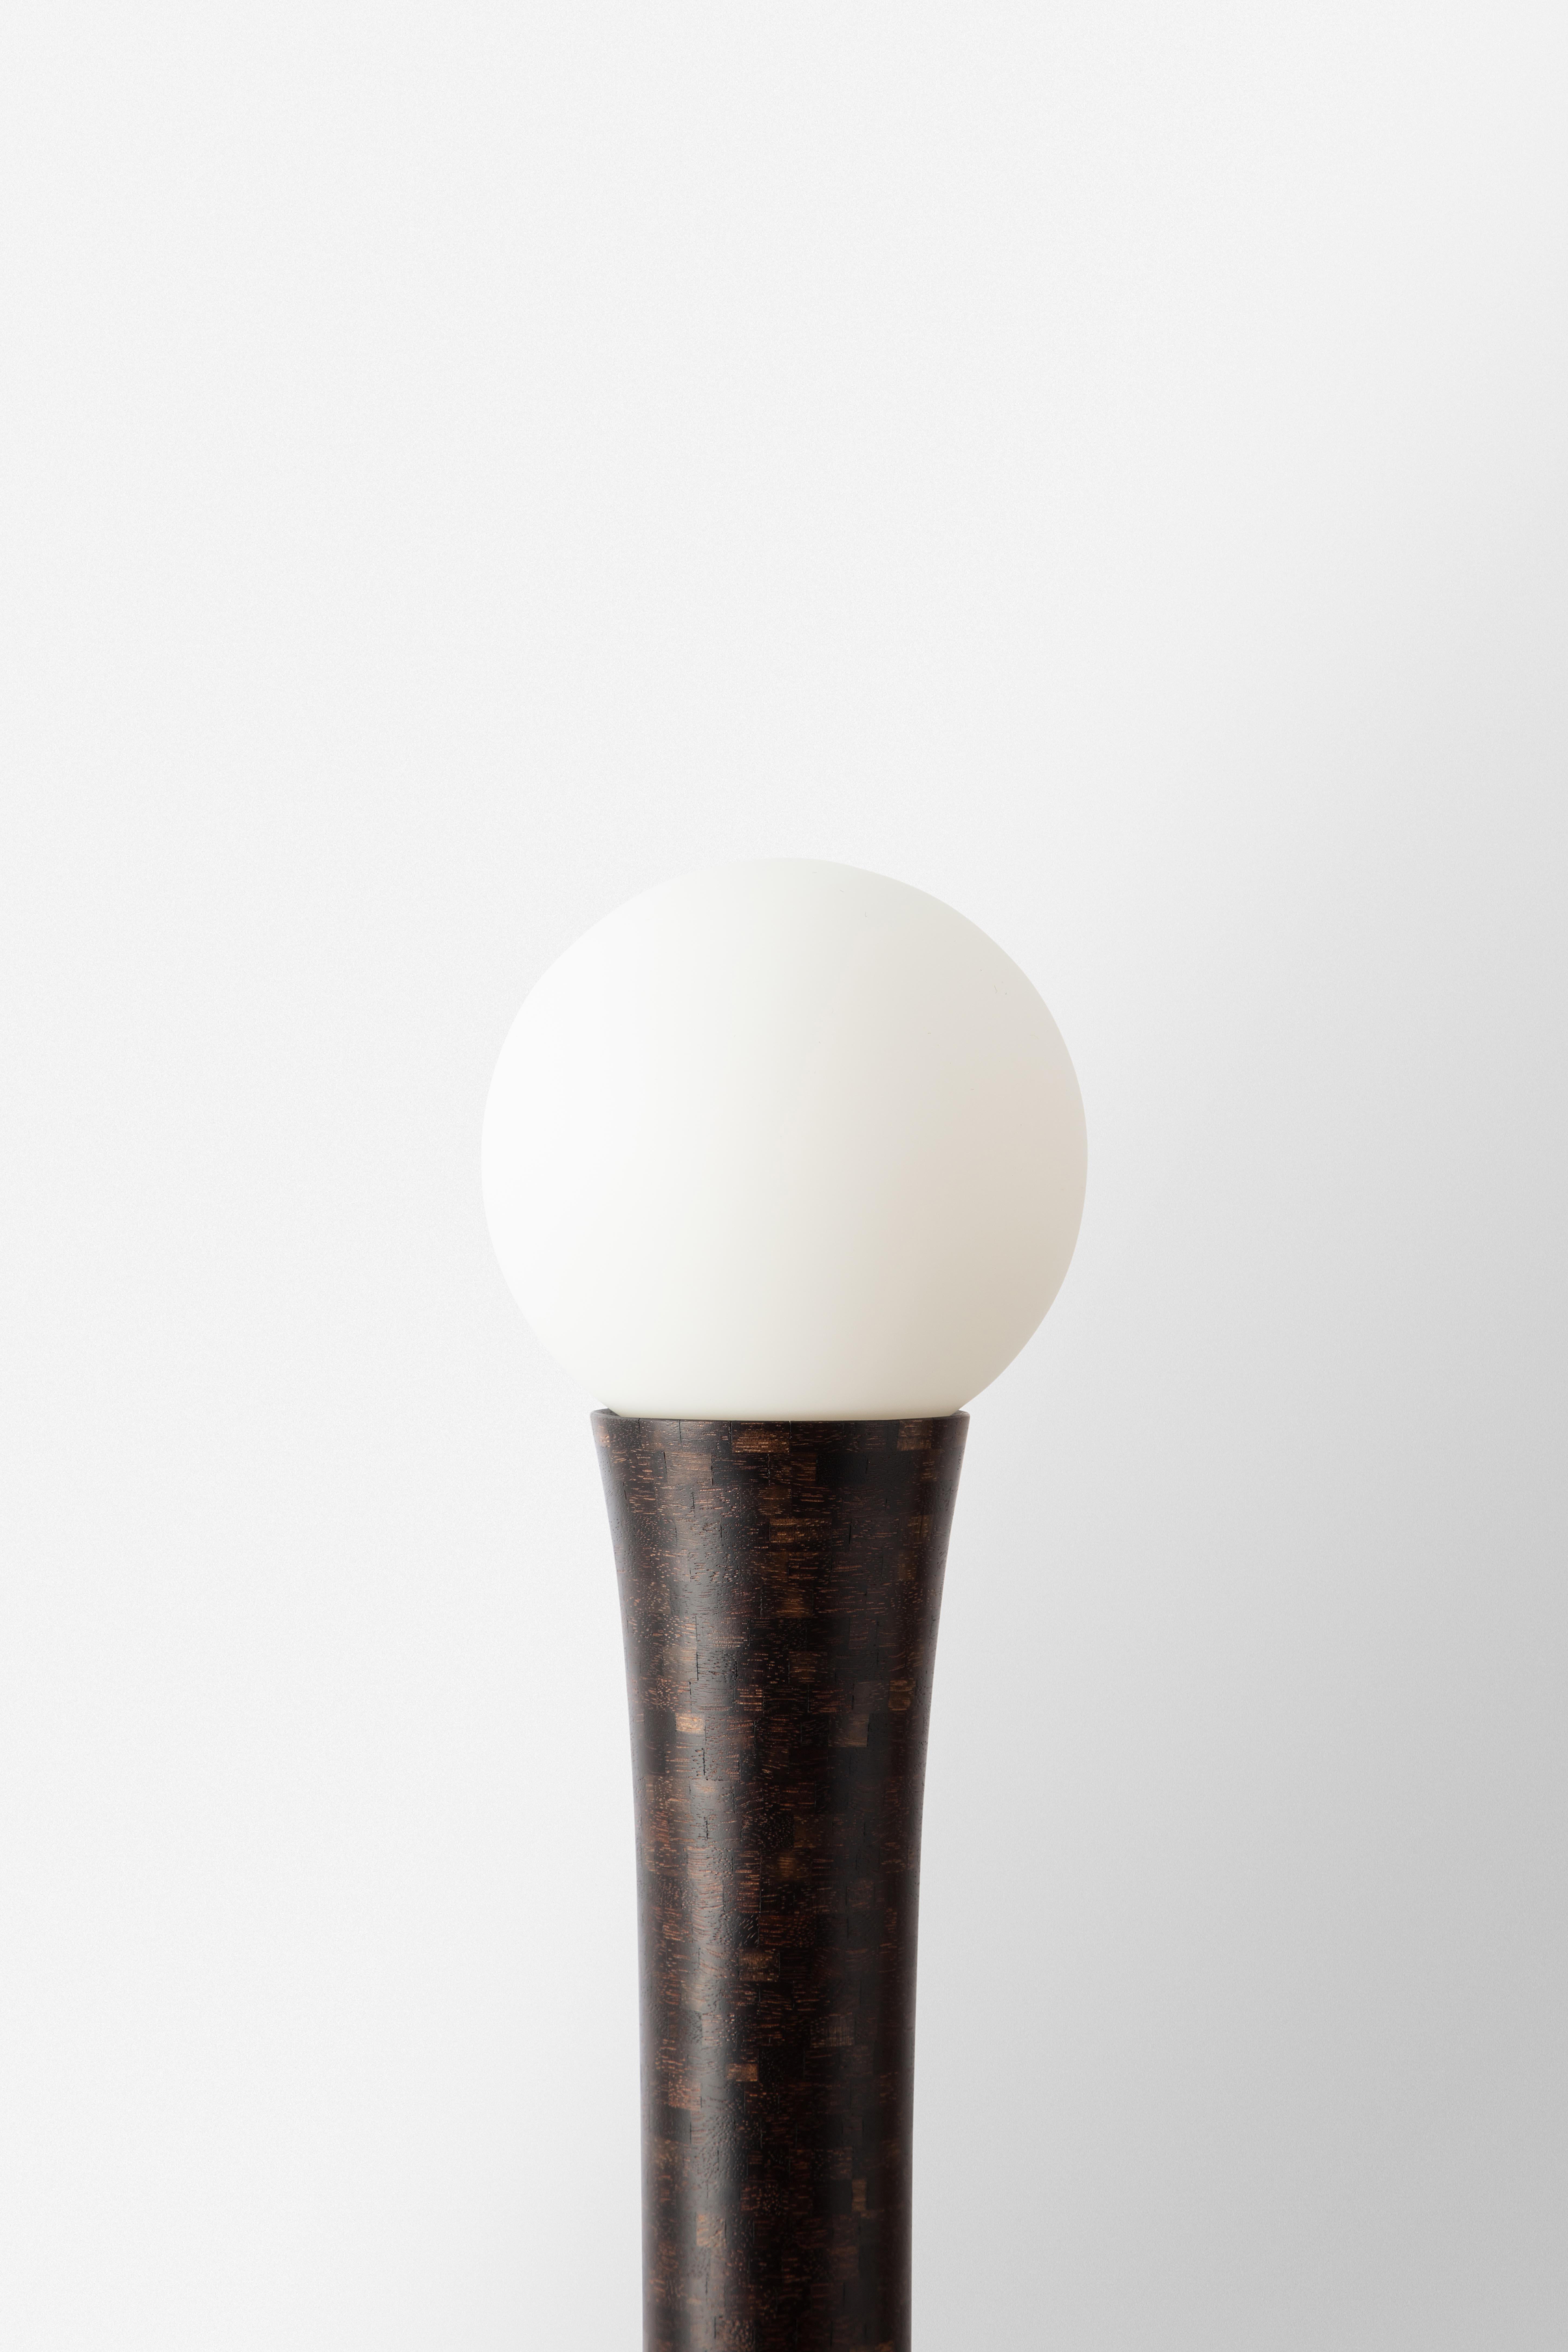 Américain STACKED Wooden Floor Lamps by Richard Haines, Oxidized Walnut, Available Now (en anglais) en vente